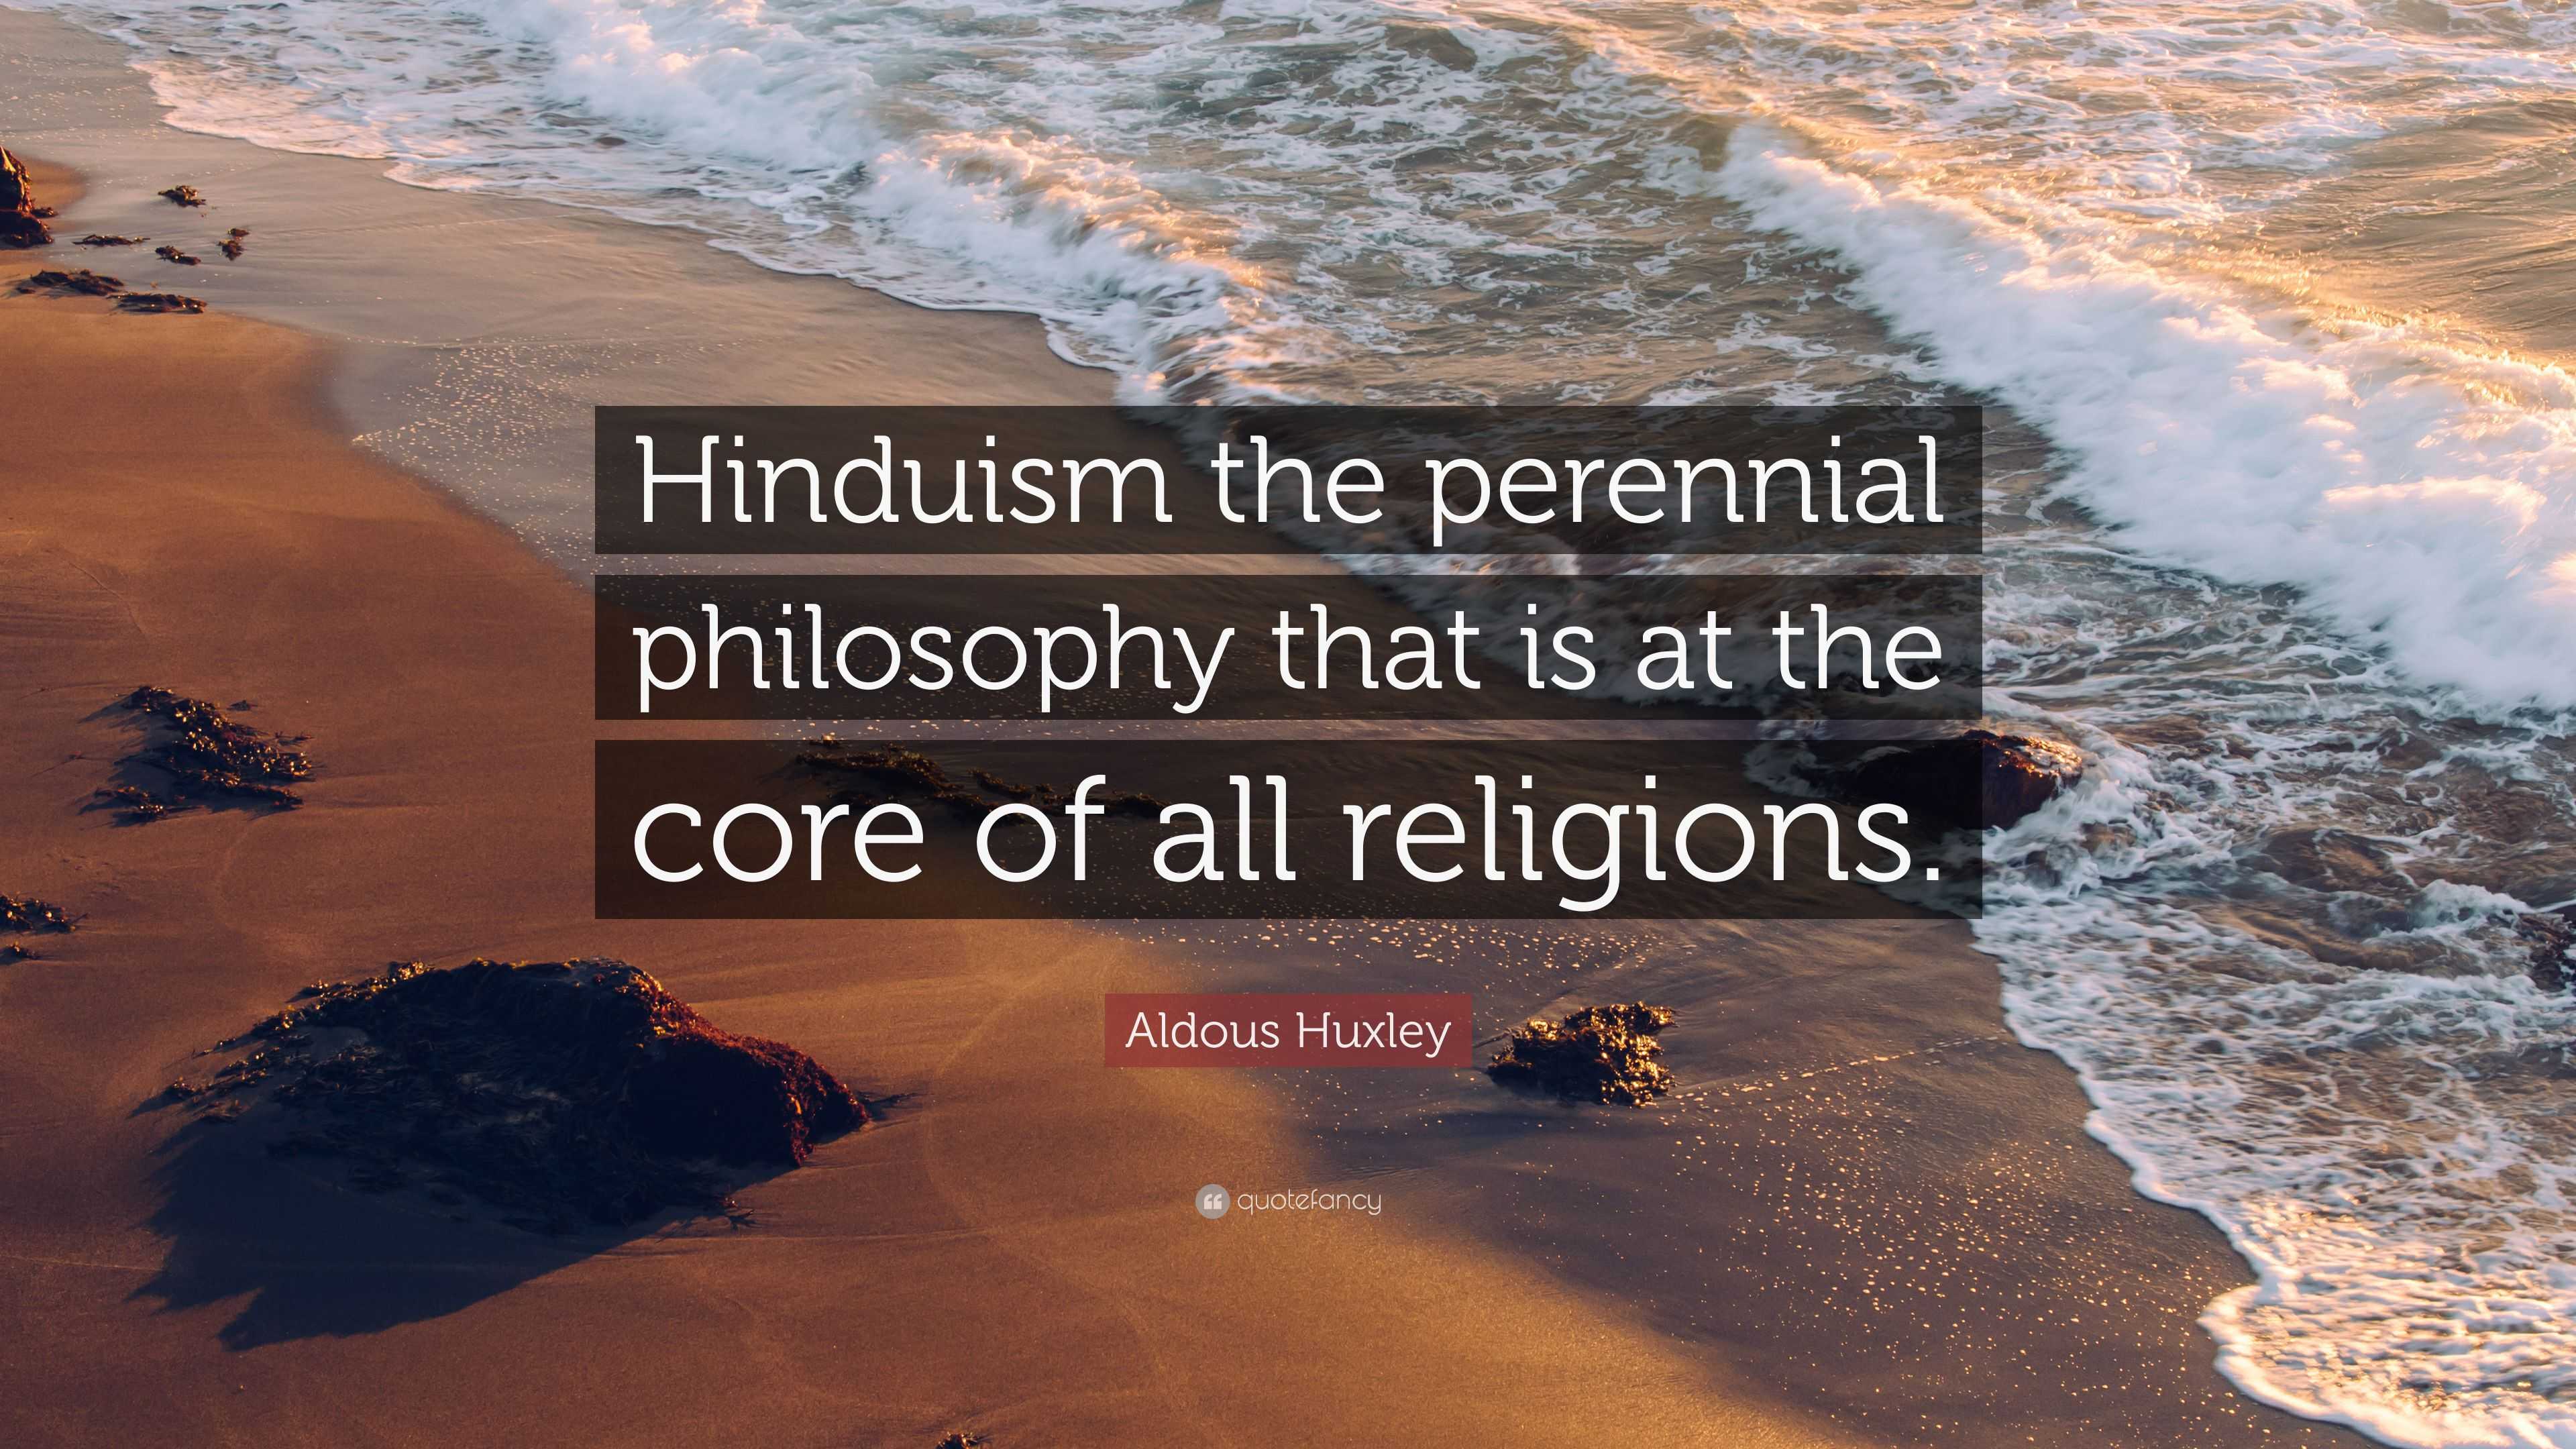 Aldous Huxley Quote: "Hinduism the perennial philosophy ...